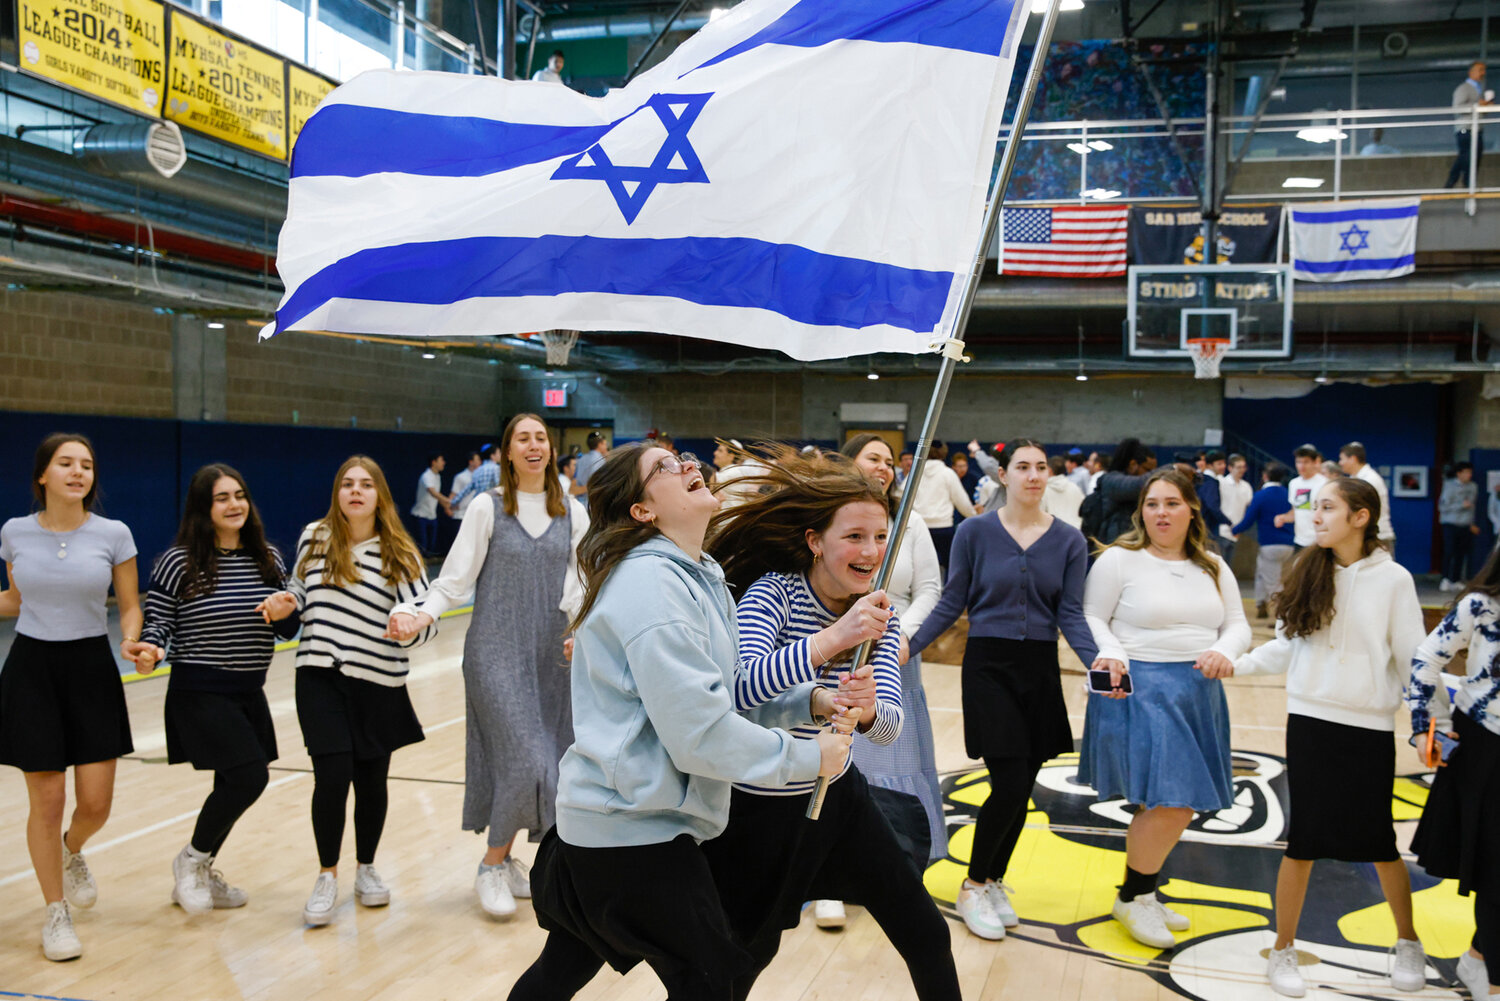 On April 25 SAR High School and Academy celebrated Yom Ha’atzmaut. The high school started with a schoolwide tefilla — a prayer — memorable and exciting festivity along with scholarly lessons dedicated to find peaceful solutions in any situation and meaning in Israel’s founding father. In 1948, David Ben-Gurion was the known national founder of the state of Israel. And the first prime minister.